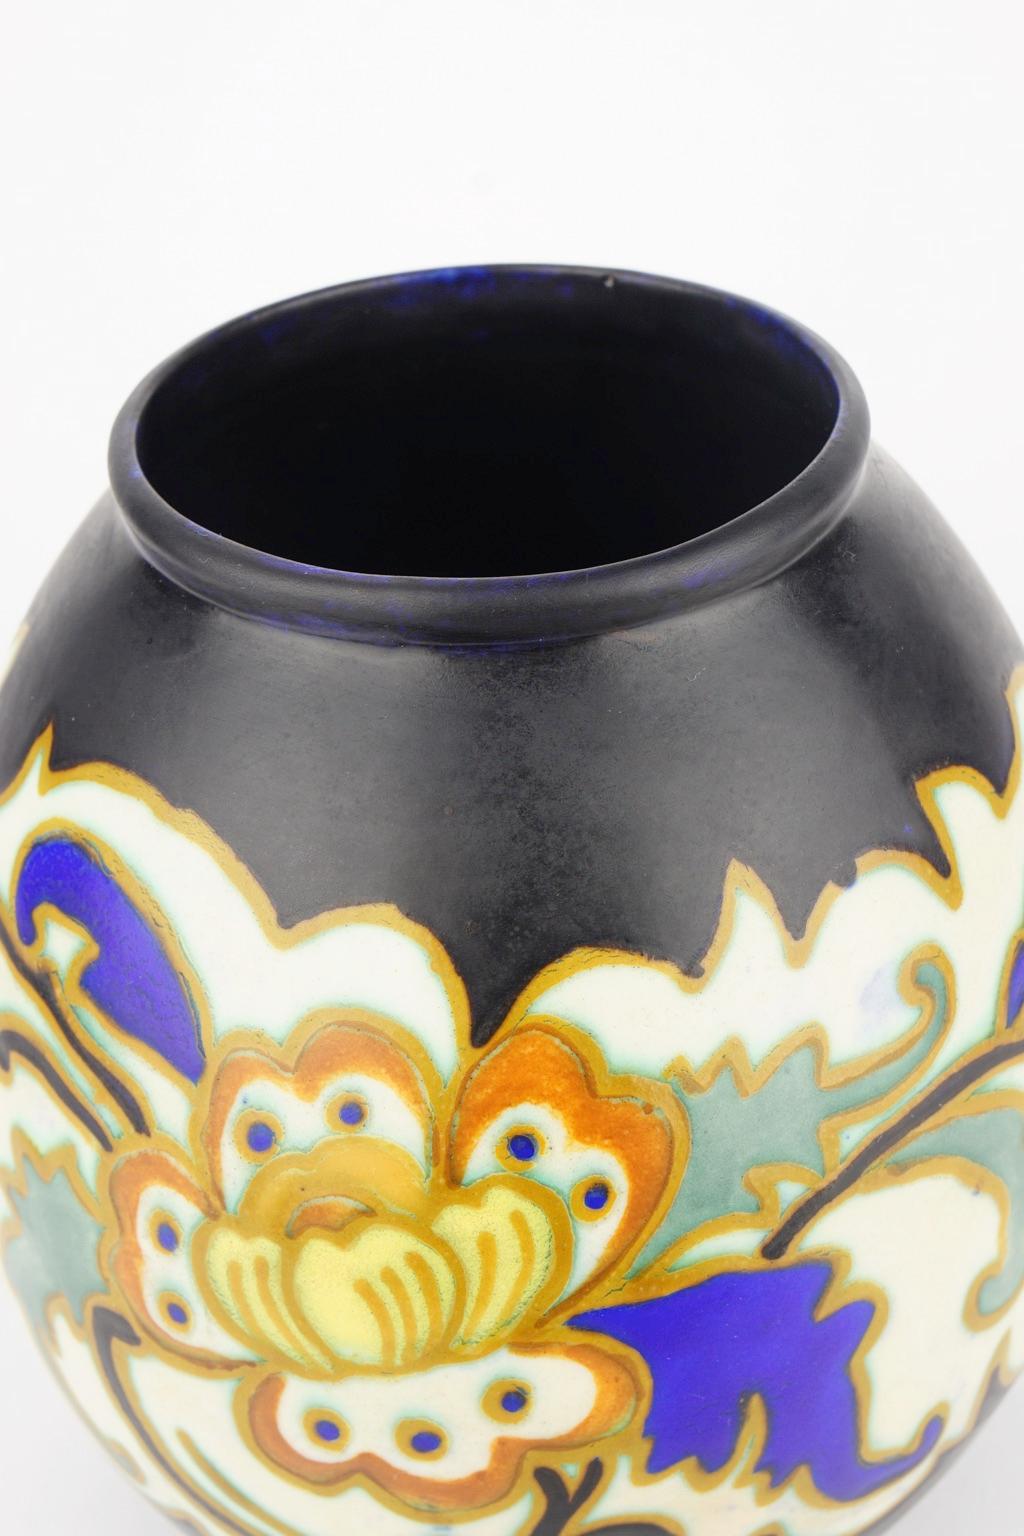 This Art Deco Keramis Boch vase has a polychrome design with a frieze of stylised flowers on a black background.

Marks: D 1276. F 900.

Size: H 18.2 cm, diameter base 11.2 cm, diameter top 9.9 cm.